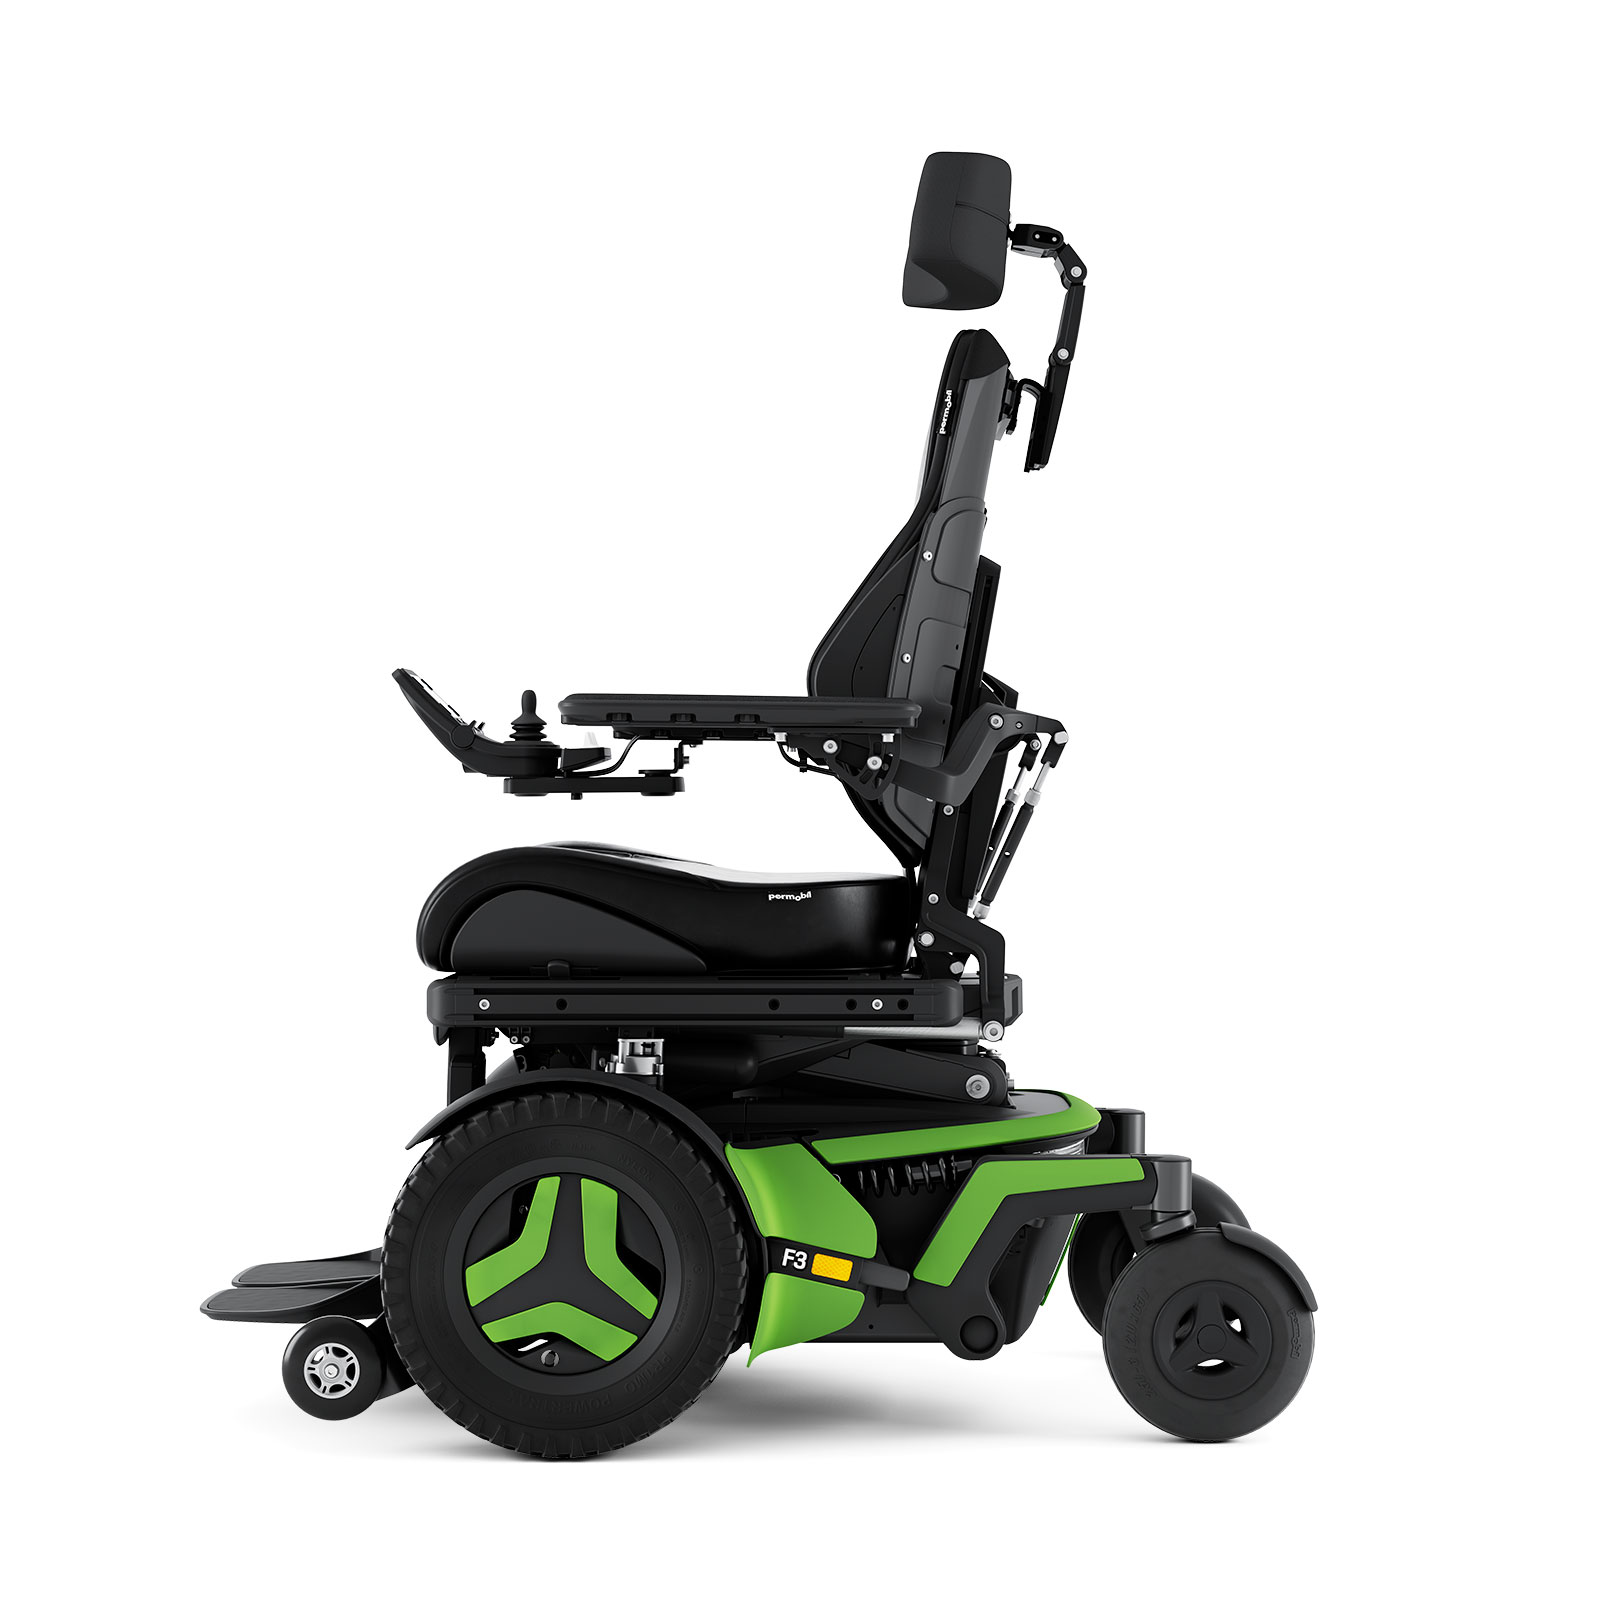 The F3 Corpus is shown from the side. It has bright green accents and black rehab seating, including a headrest.